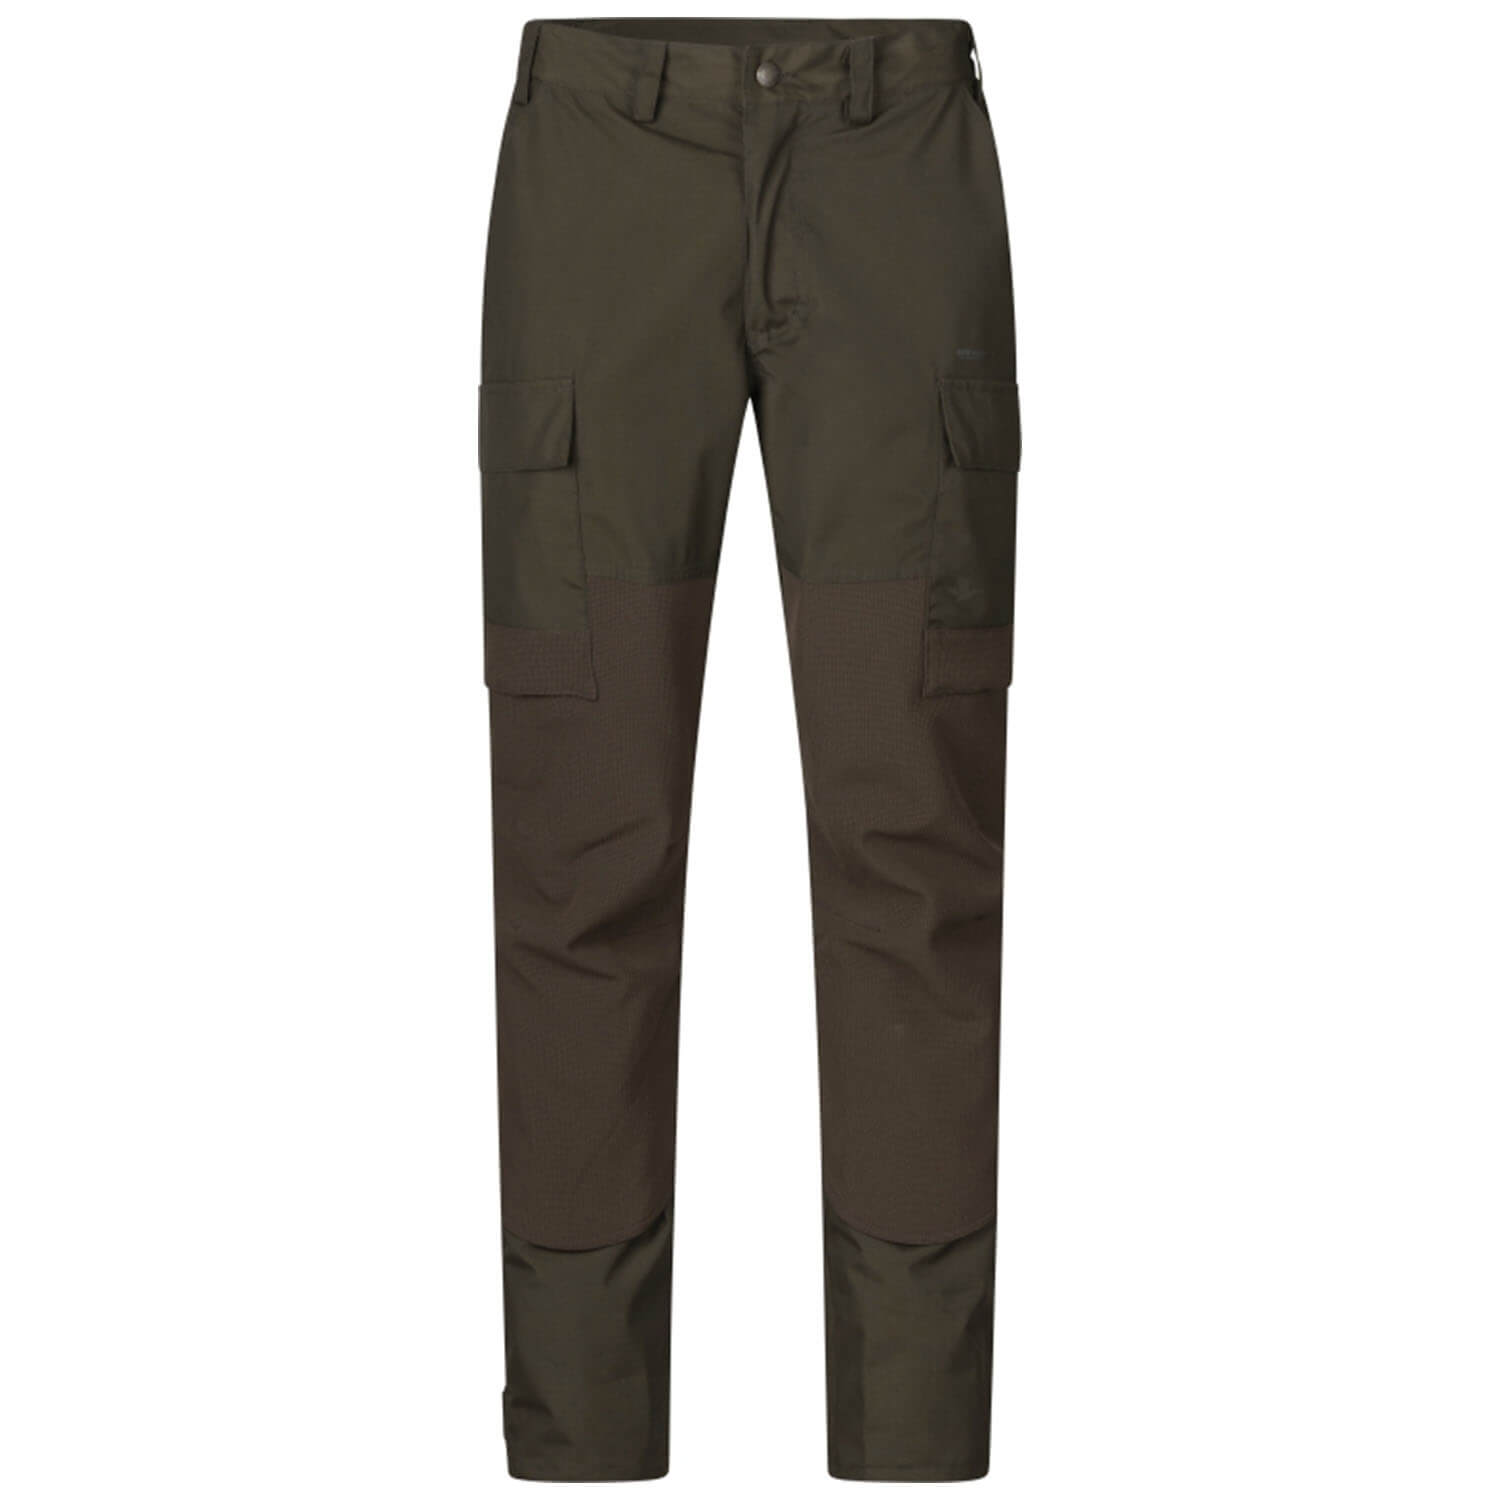 Seeland hunting pants Arden (pine green) - Hunting Trousers